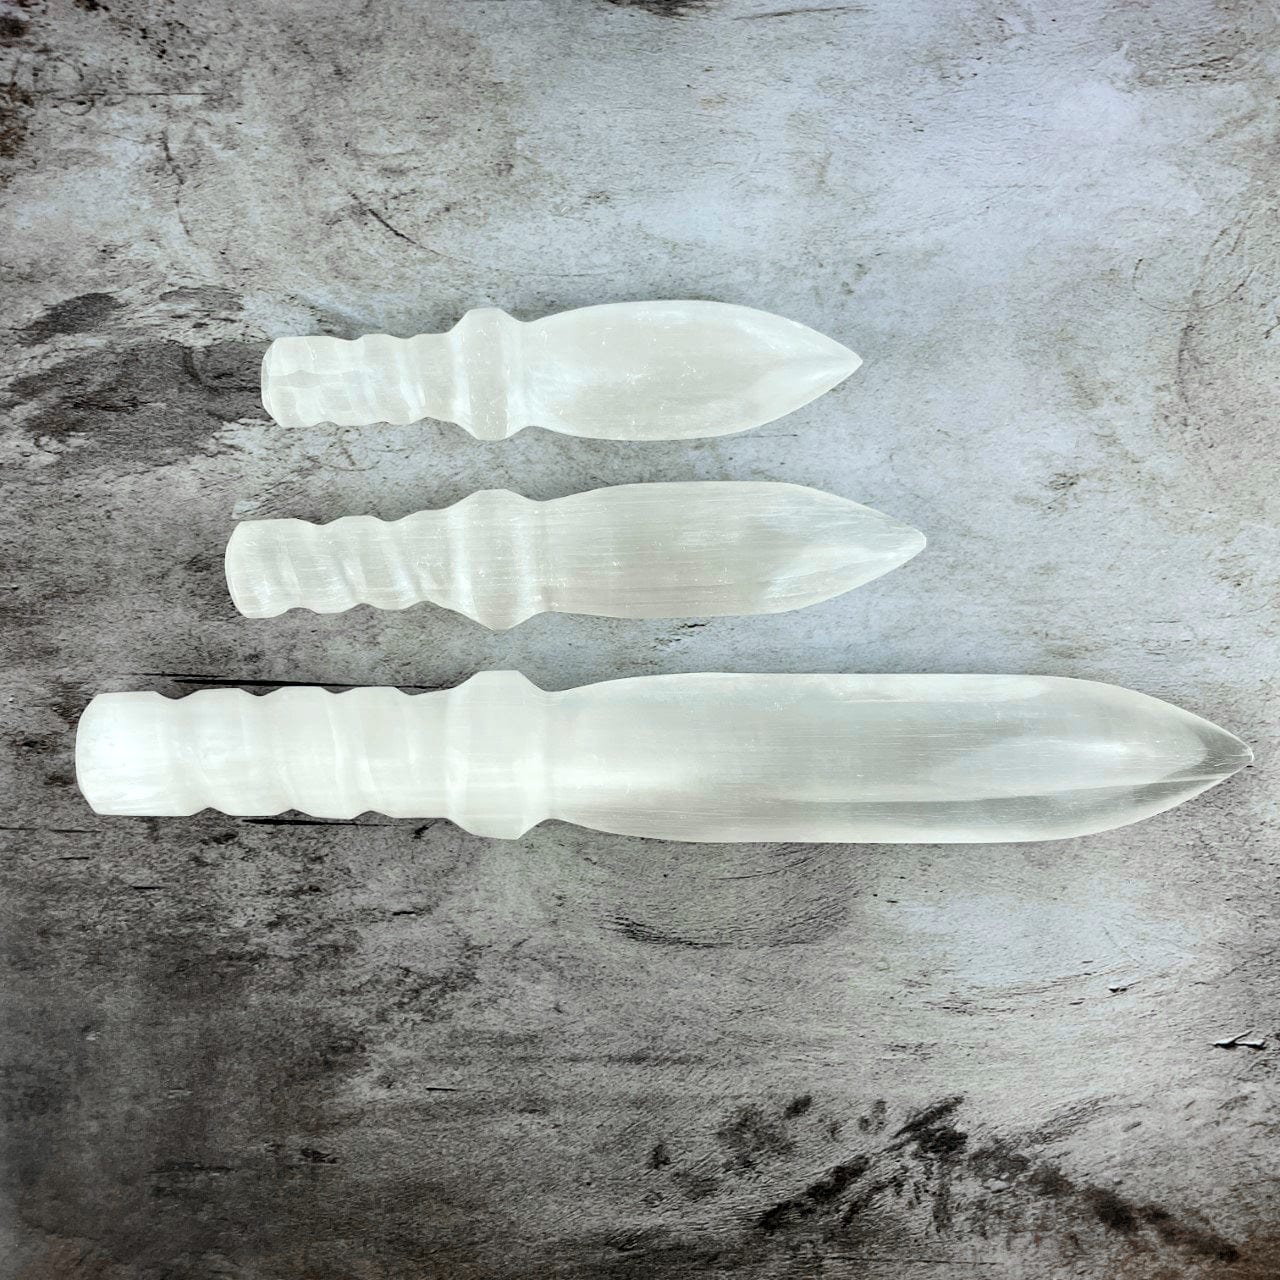 3 sizes of Selenite Knives with Twisted Handles horizontally placed